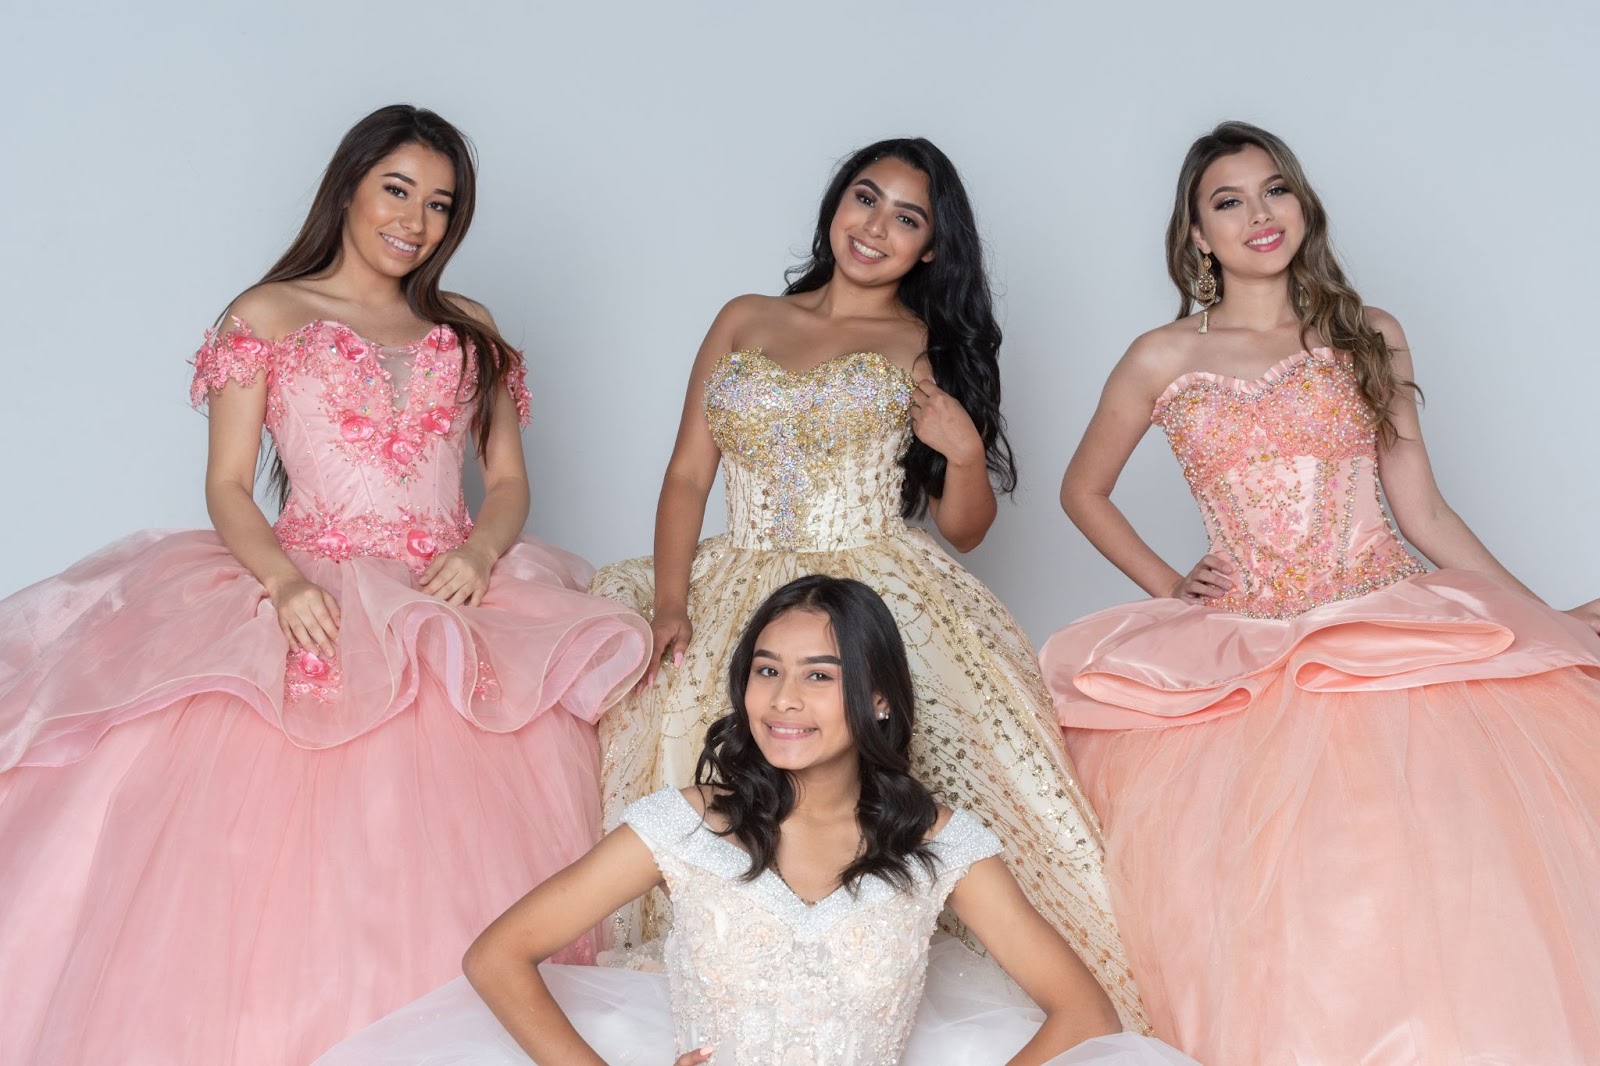 Top 5 Ocassions to Wear an Evening Gown featuring everprettycom   LaMoumous